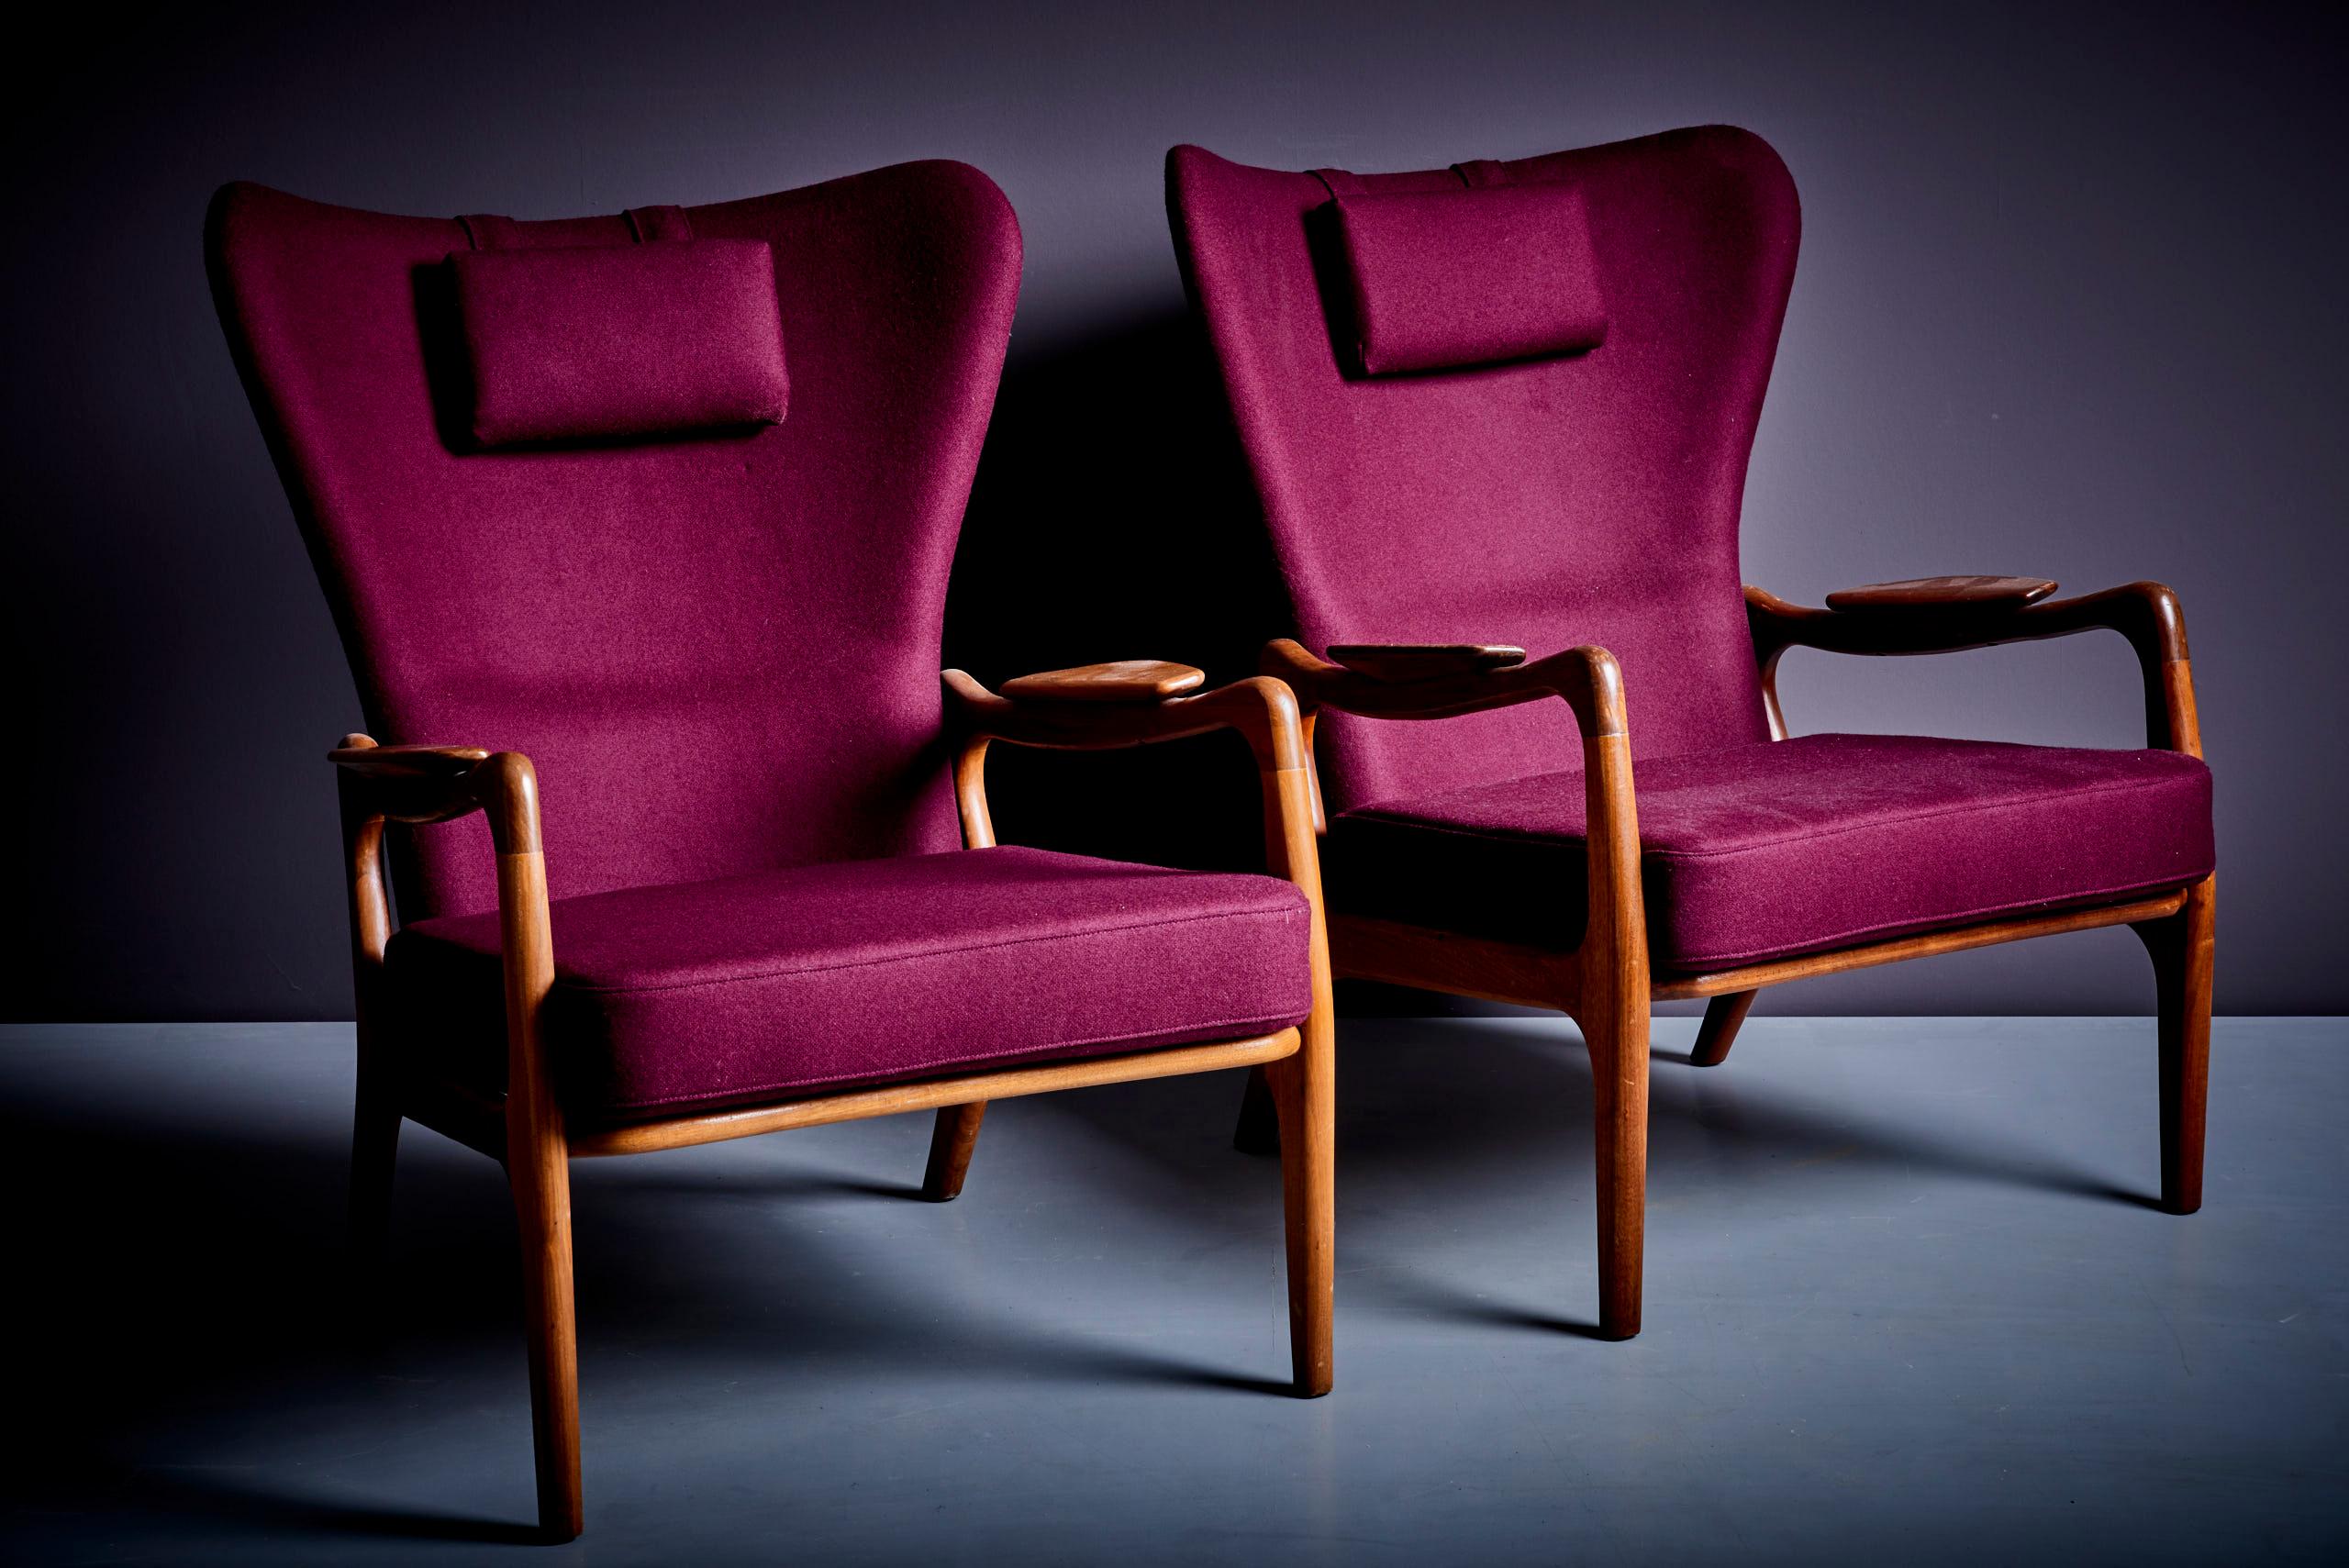 Newly Restored Pair of Plum Adrian Pearsall High Back Wing Lounge Chair 1950s For Sale 8